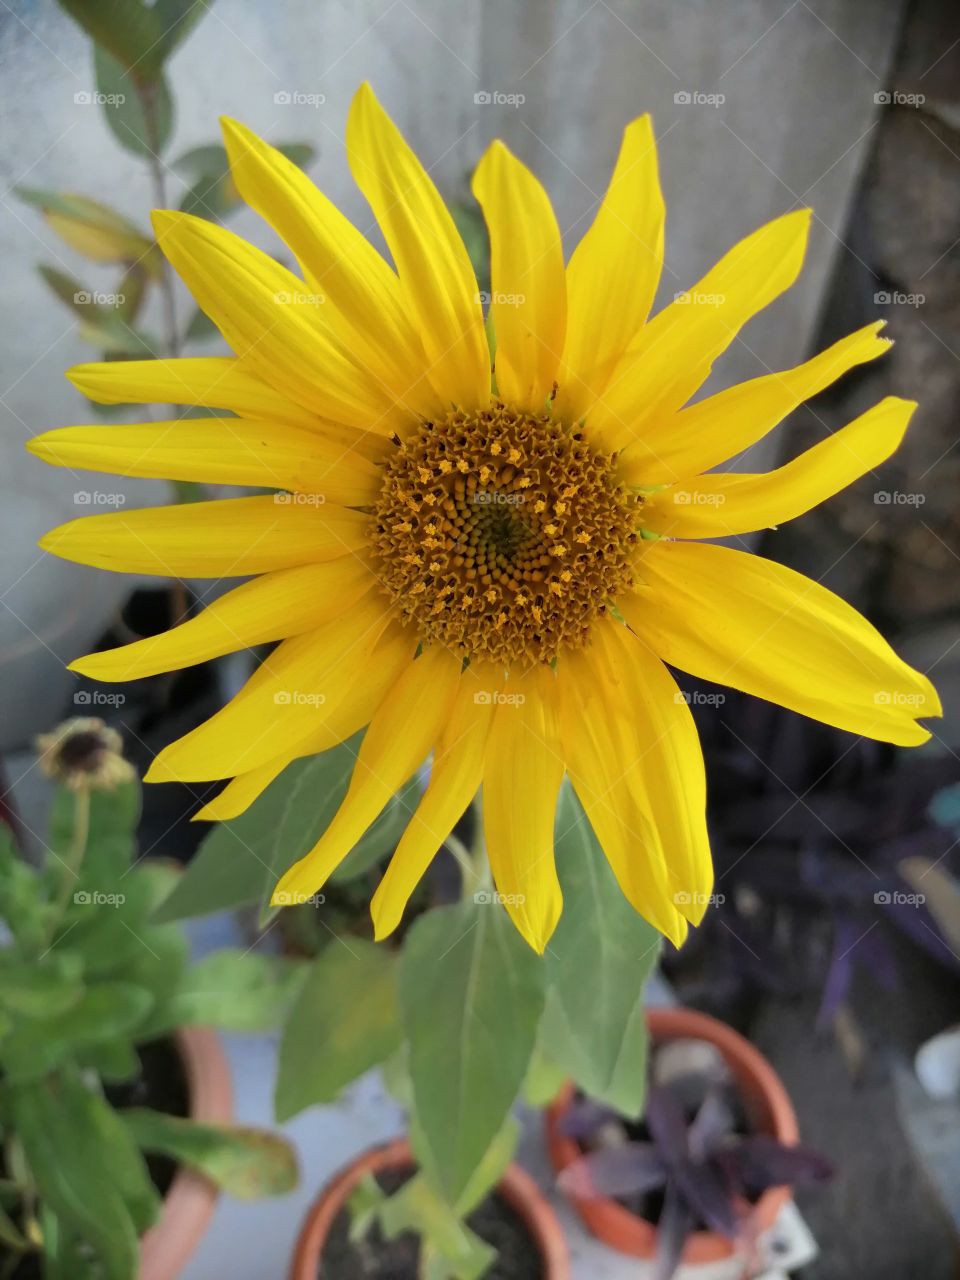 Shapes of nature. Beautiful yellow colour sunflower.